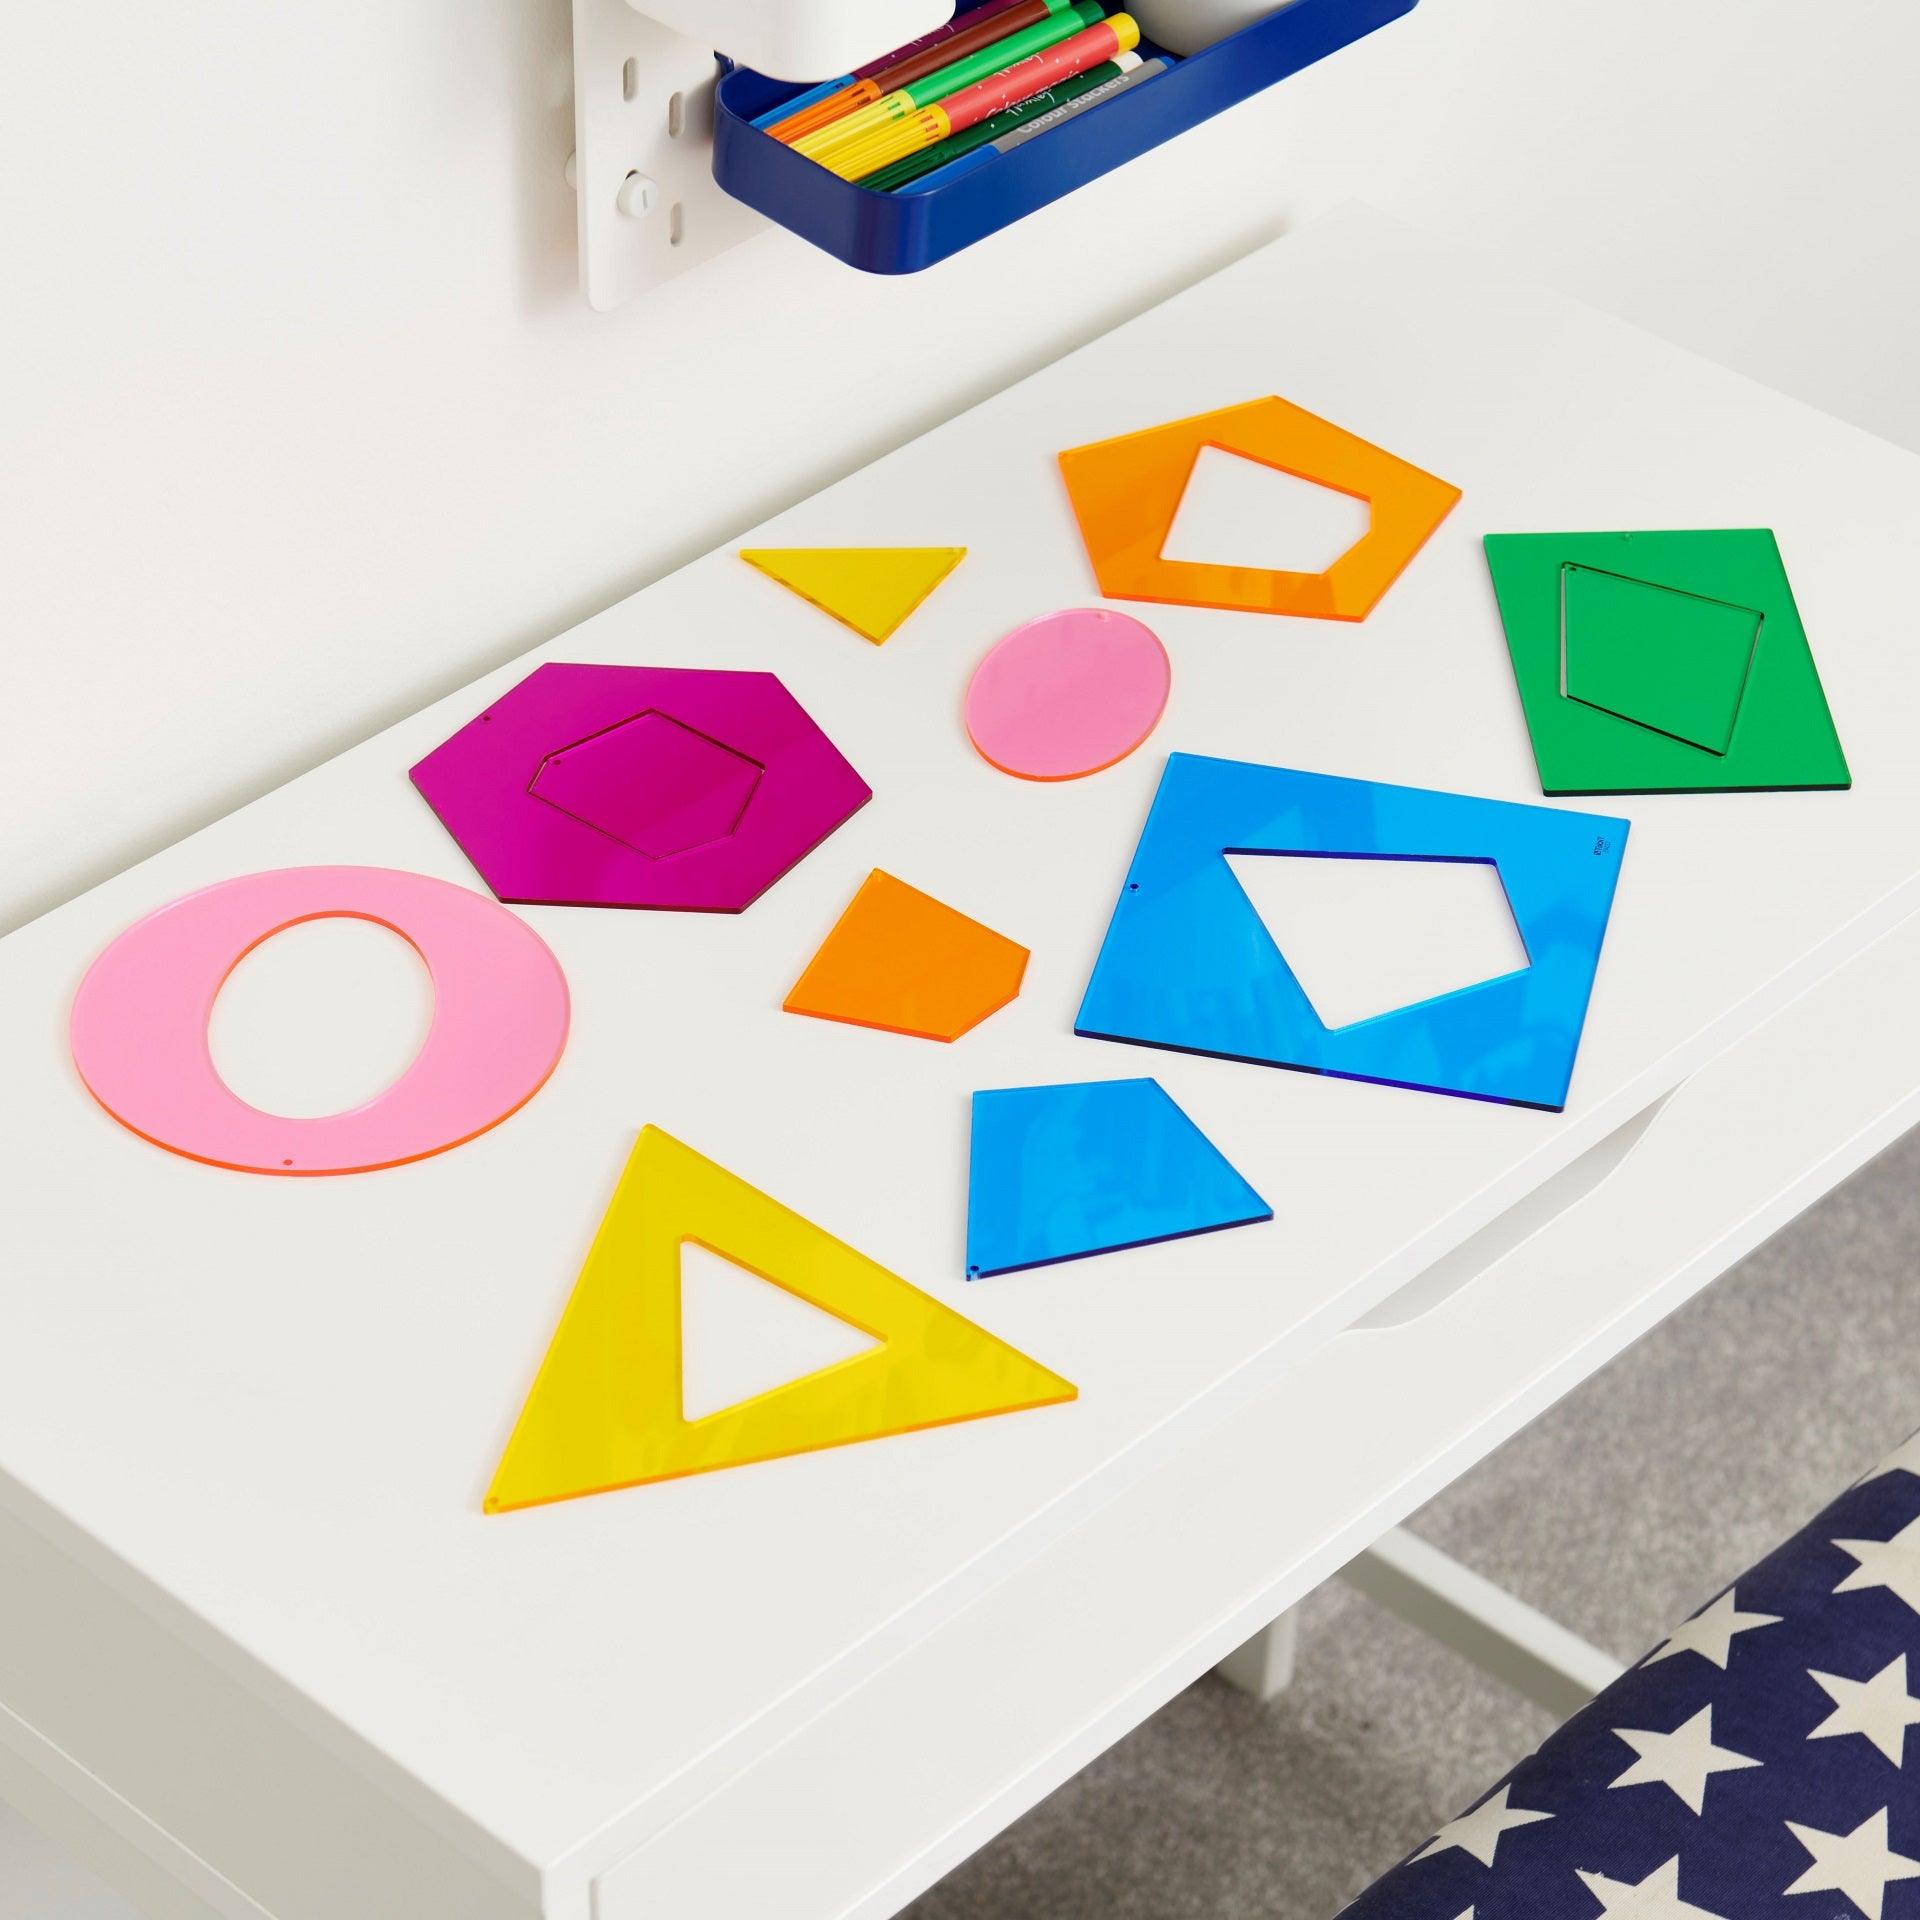 TickiT Jumbo Regular and Irregular Shapes, Our TickiT® Jumbo Regular & Irregular Shapes are perfect for your child to learn about geometric shapes and their characteristics. Interesting and tactile, they are a fun visual way to demonstrate that regular shapes have equal sides and angles; whereas irregular shapes can have angles and sides of any value. The inner and outer puzzle pieces match, by their colour and their attributes, e.g. the purple hexagons each have 6 sides; the irregular shape fits inside the